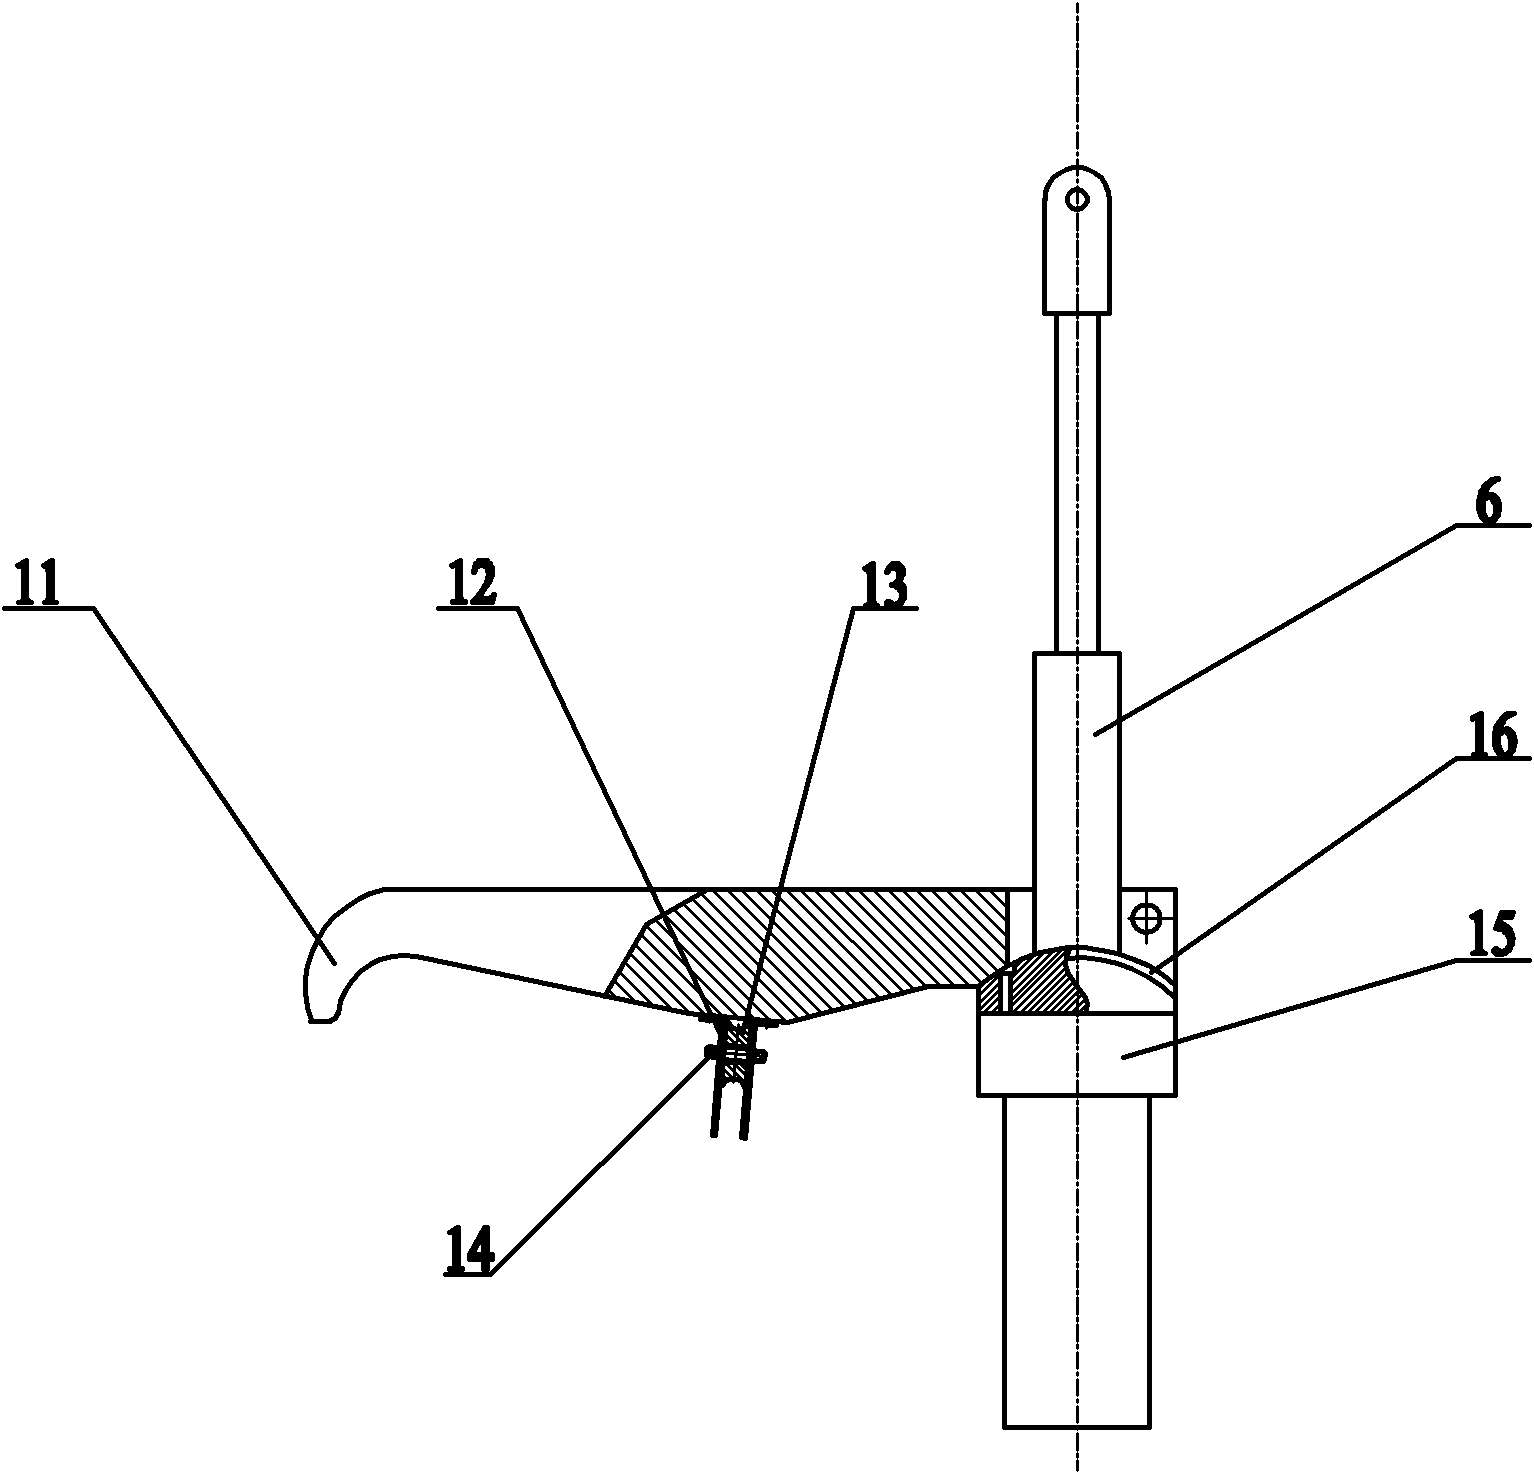 Clamping apparatus of live line tools